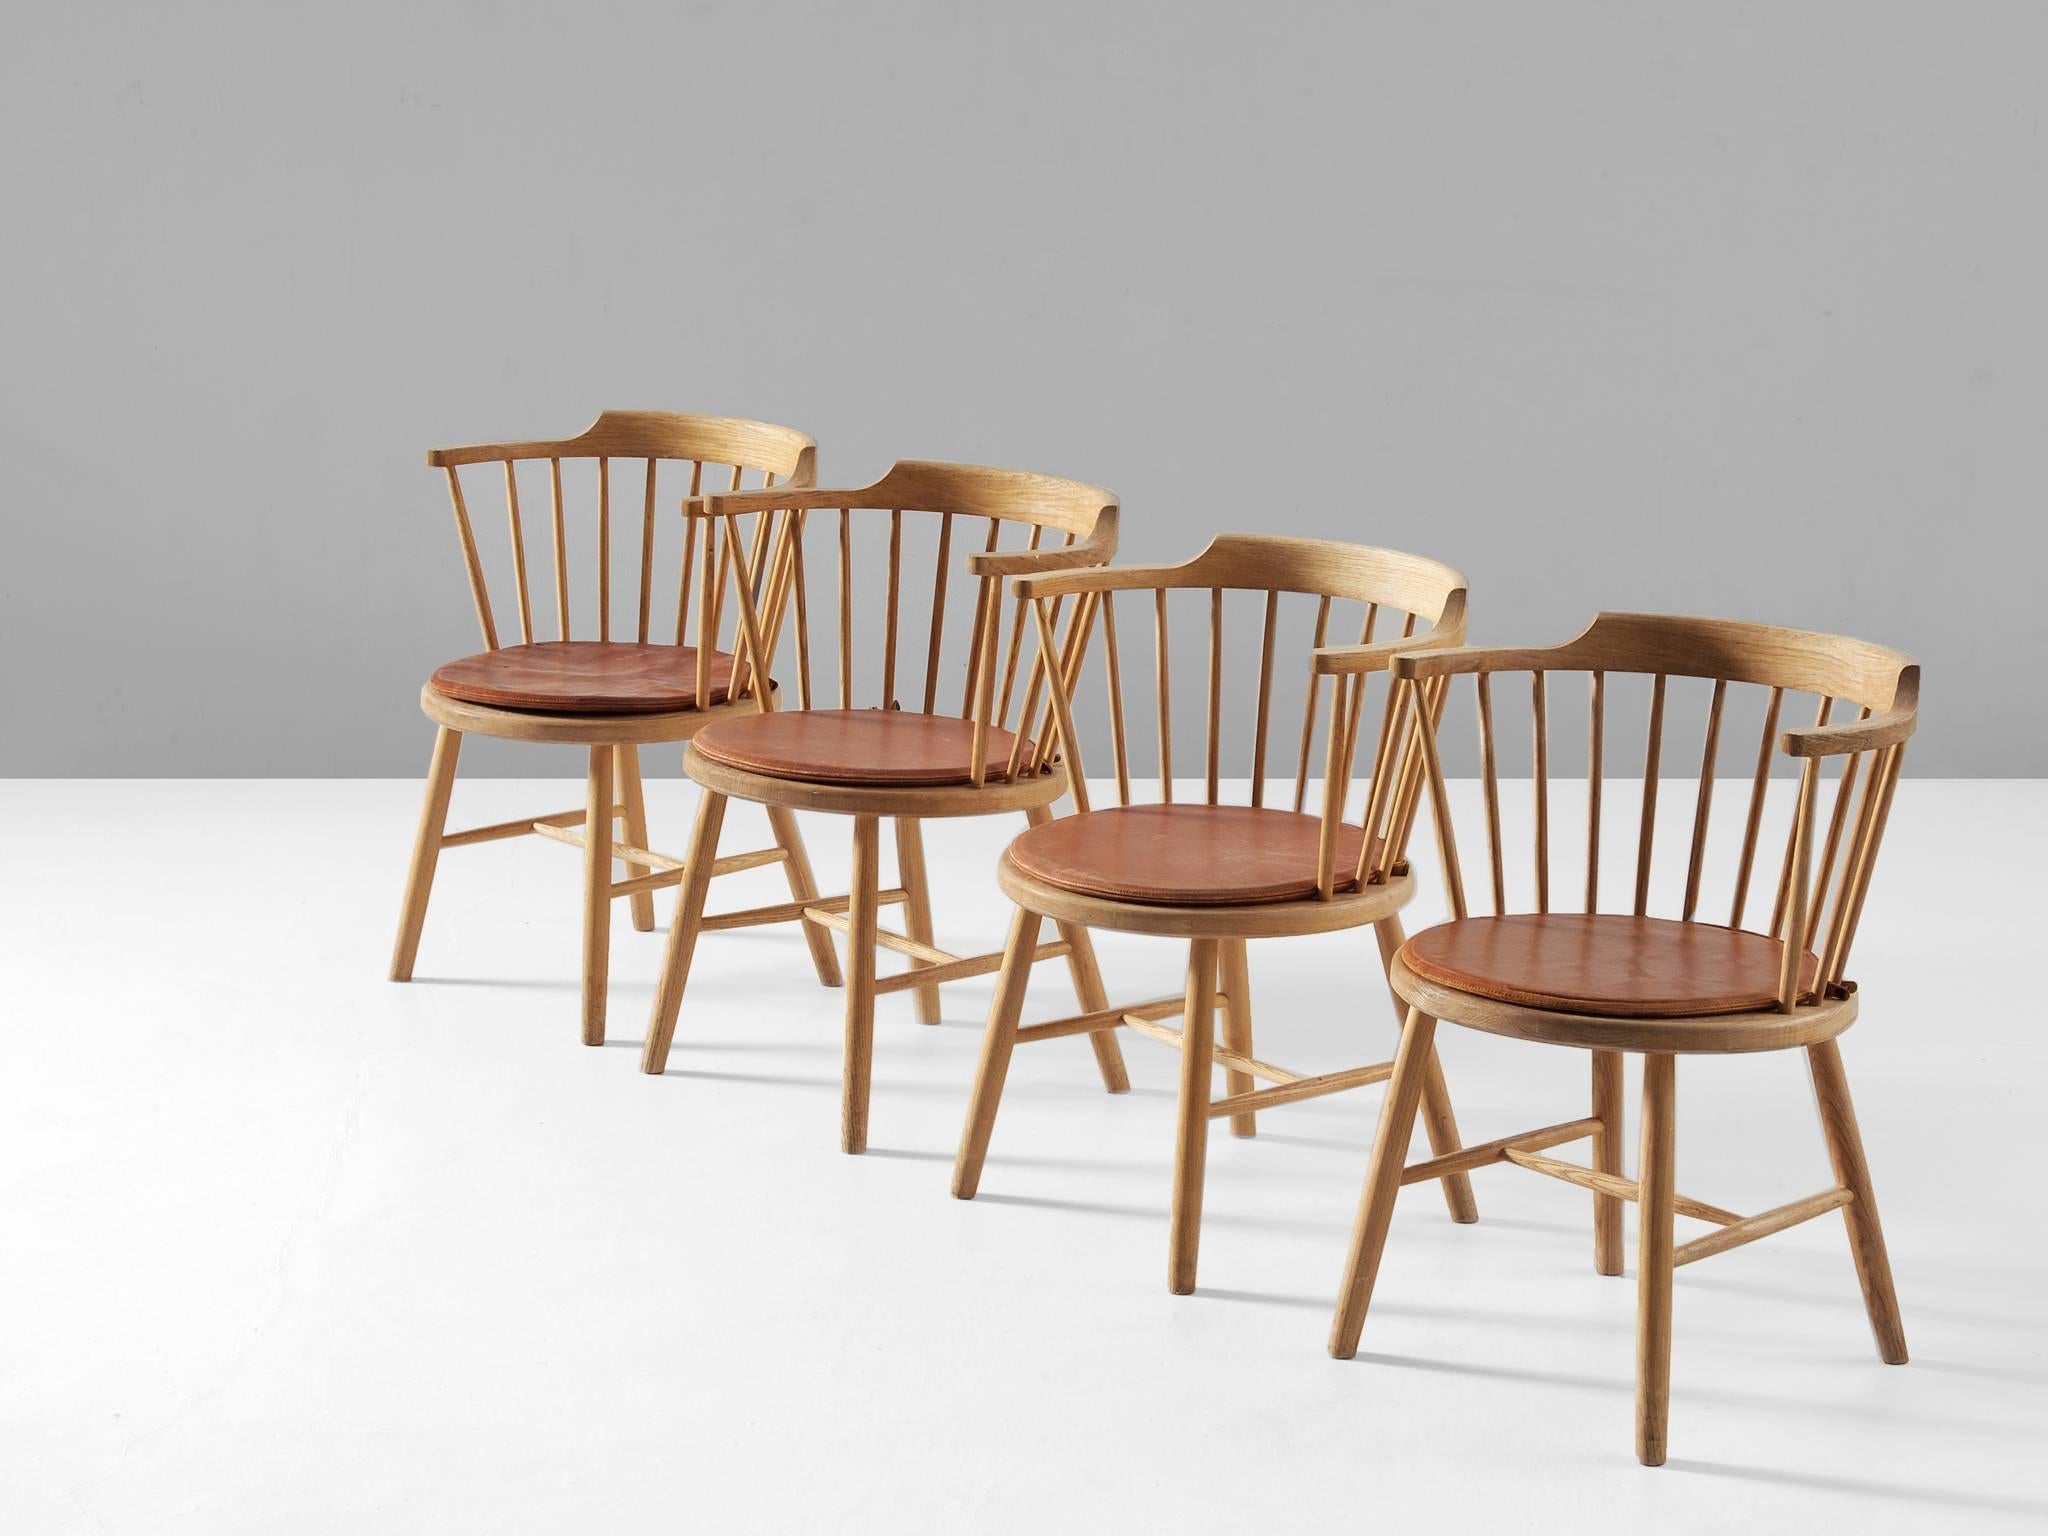 Set of four dining chairs model 3249, in oak, by Børge Mogensen for Fredericia Stolefabrik, Denmark, 1944. 

Set of four 'Captain chairs' with a spindle back and armrests. Elegant yet simplistic chairs with a beautiful spoke back. Repetitive form